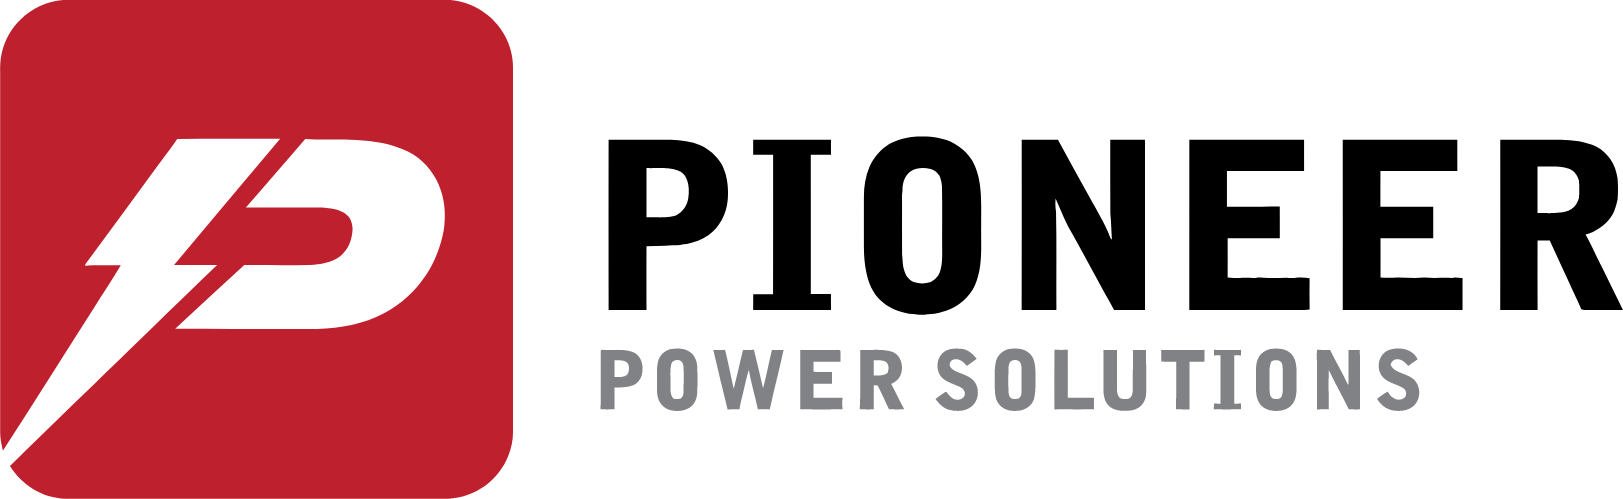 Pioneer Power Solutions logo large (transparent PNG)